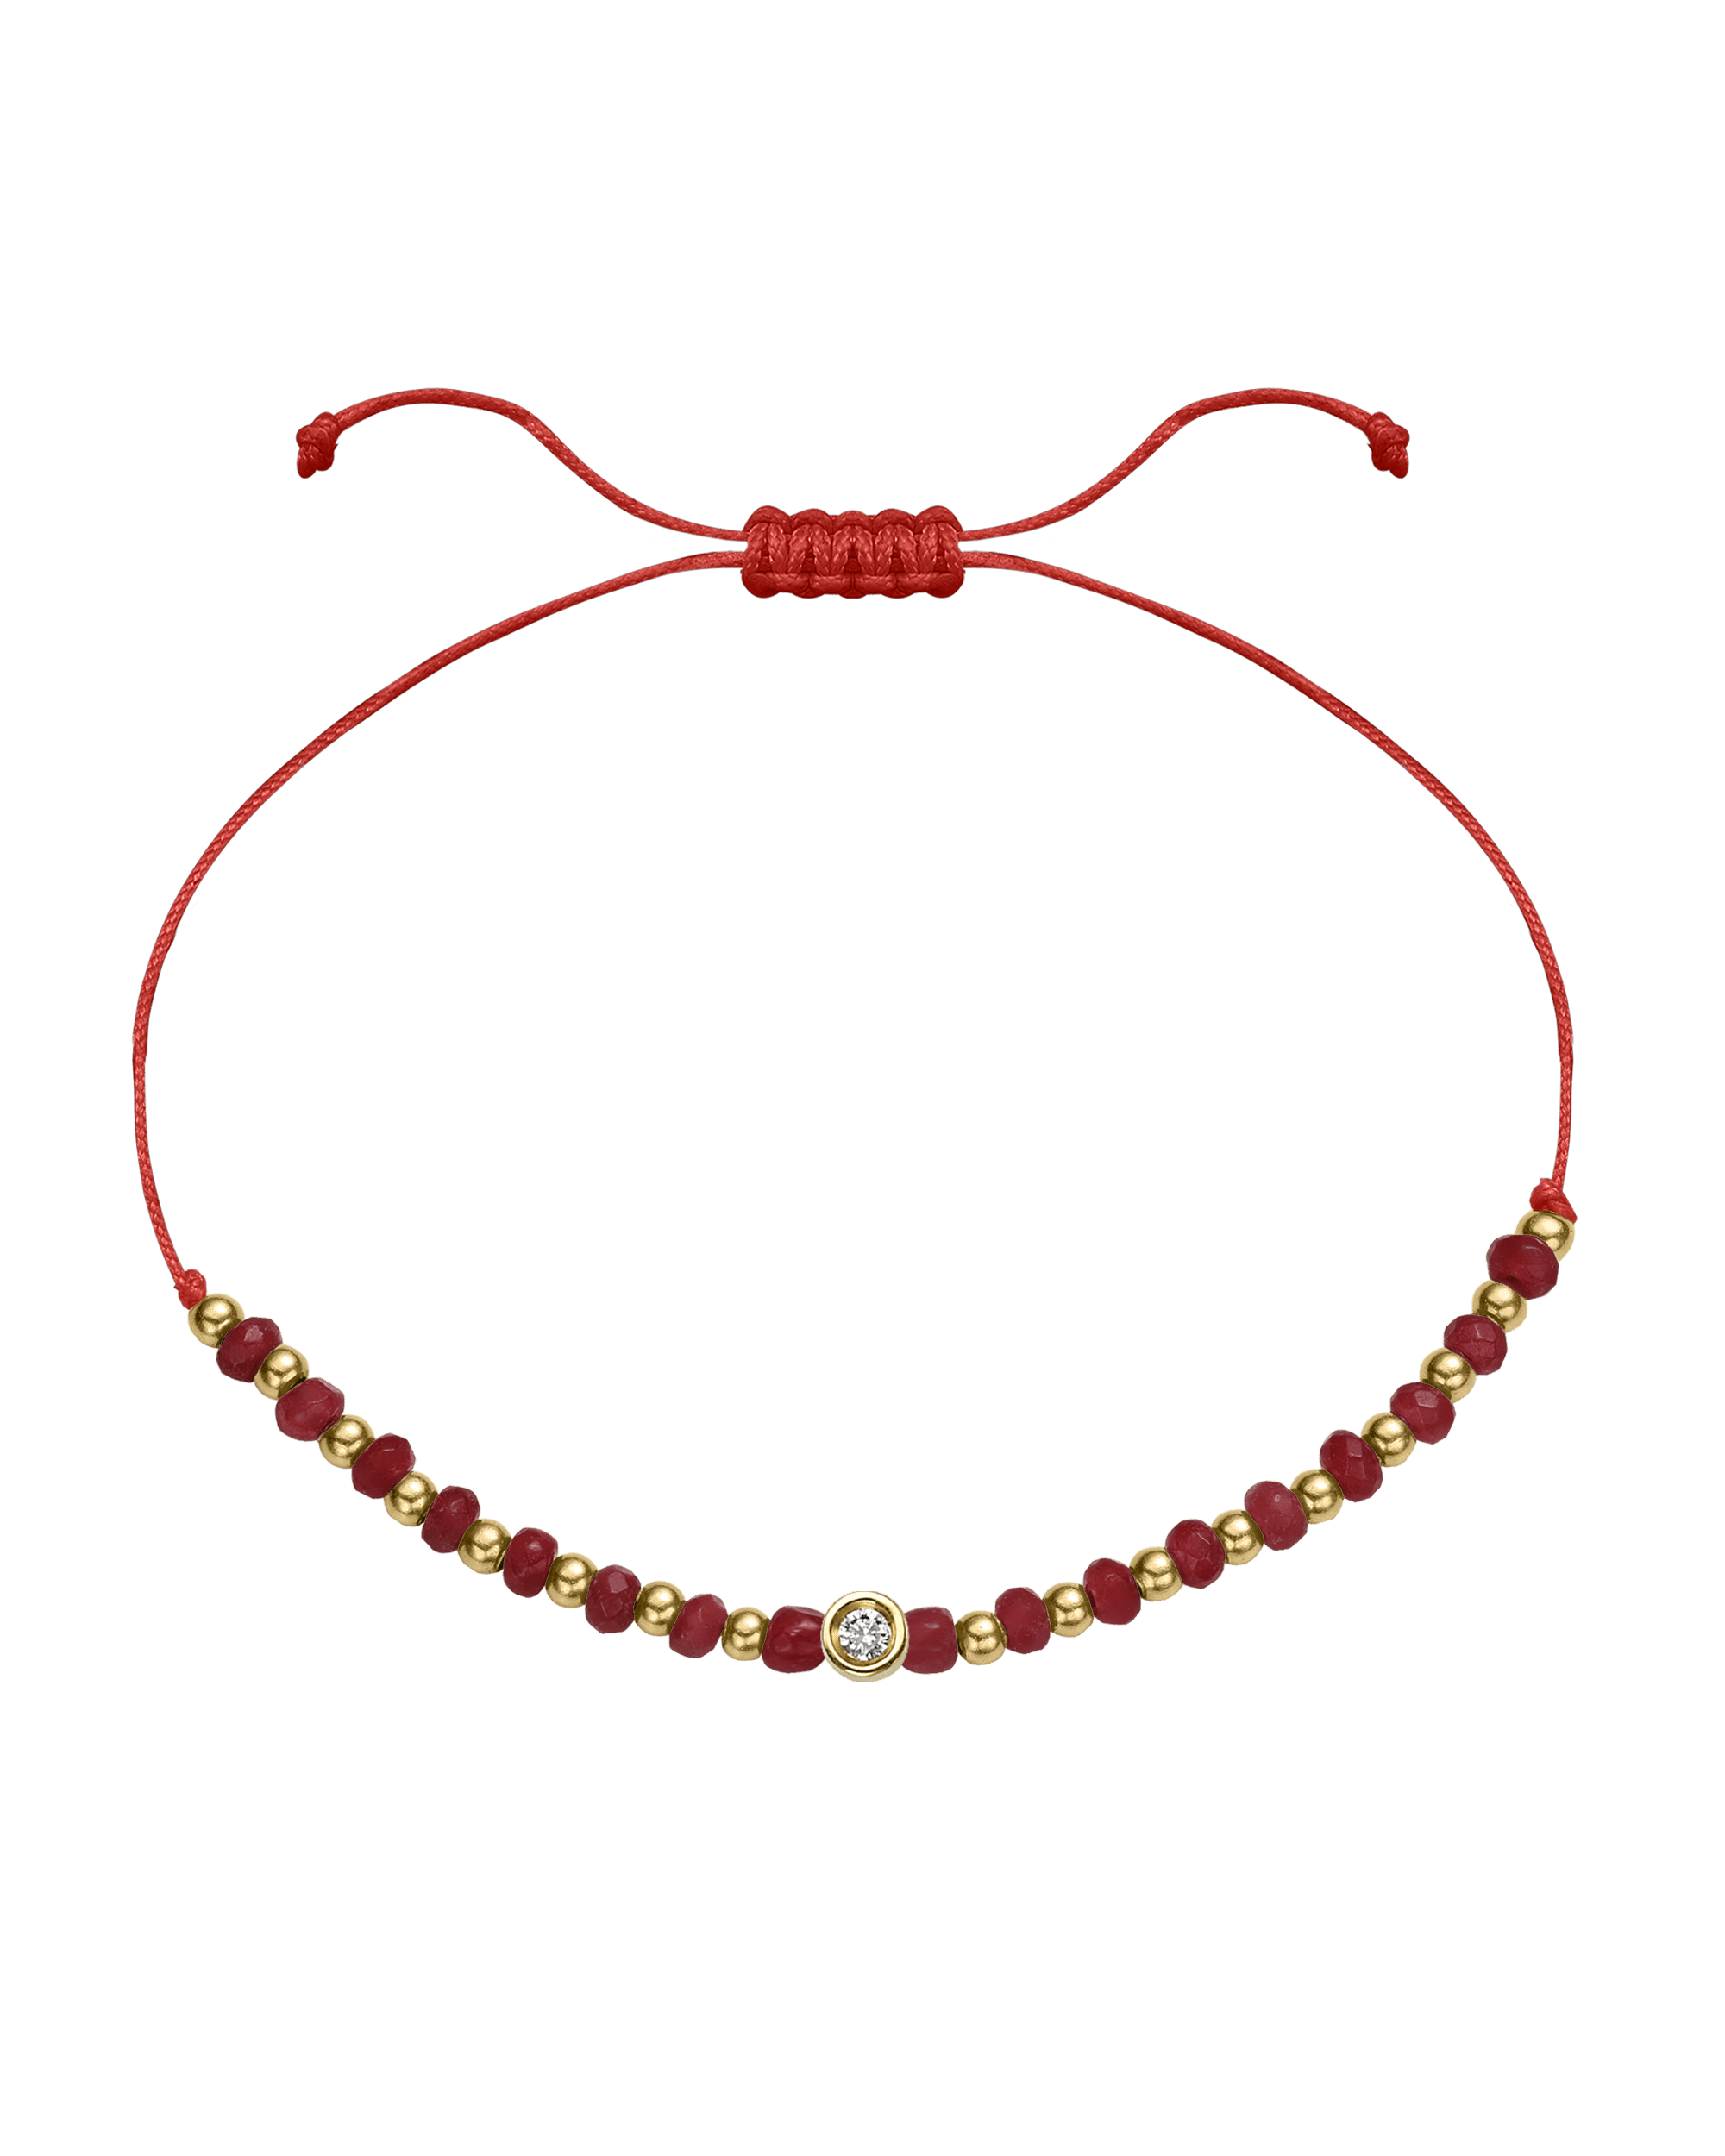 Red Agate Gemstone String of Love Bracelet for Confidence - 14K Yellow Gold Bracelet 14K Solid Gold Red Small: 0.03ct 